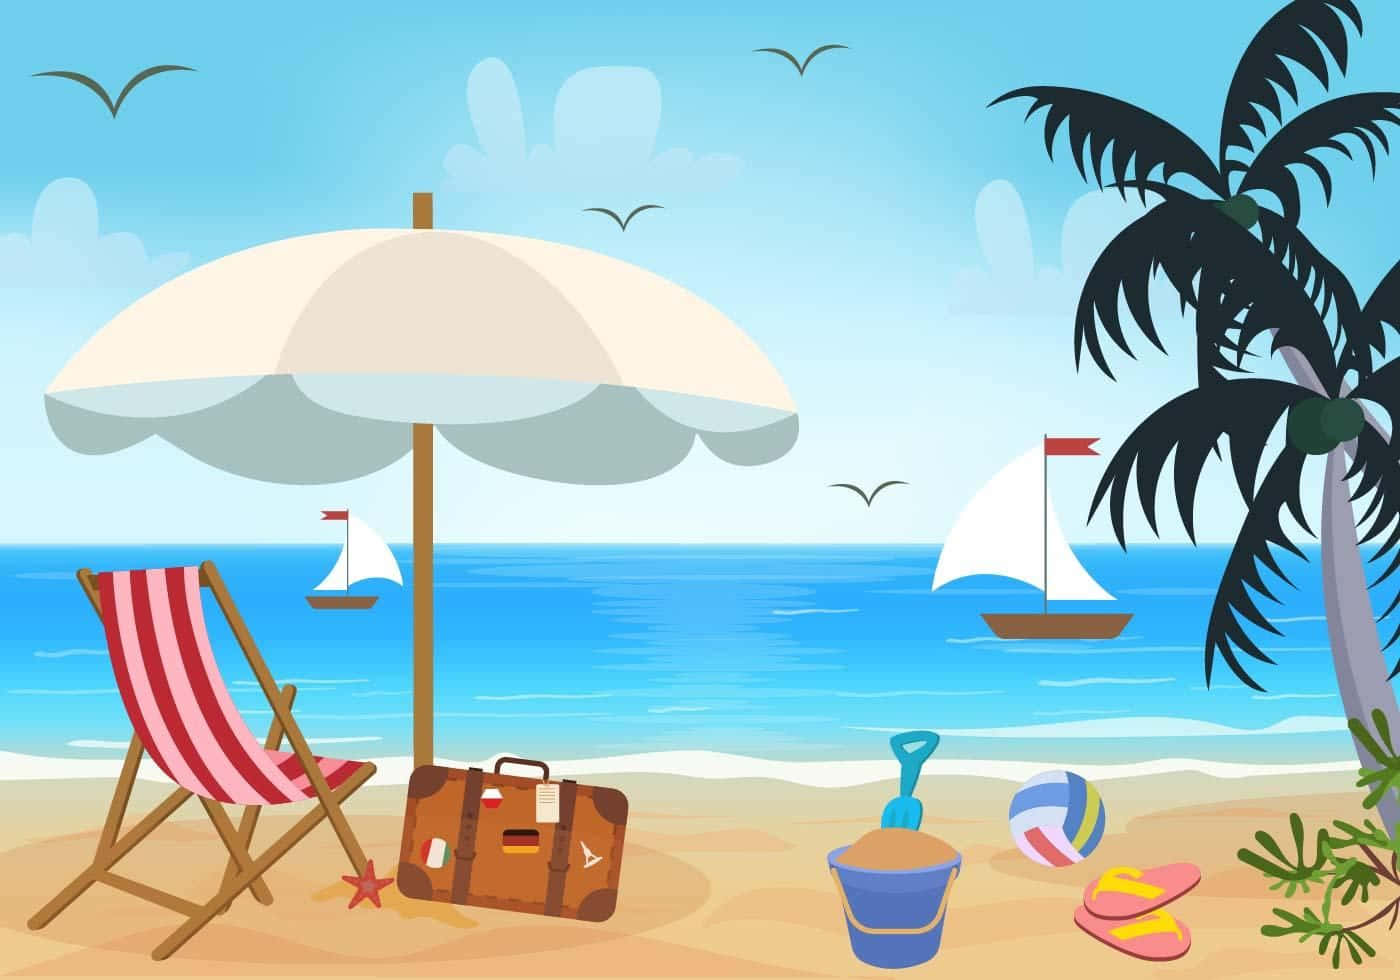 A Beach Scene With Umbrella, Chairs, And Luggage